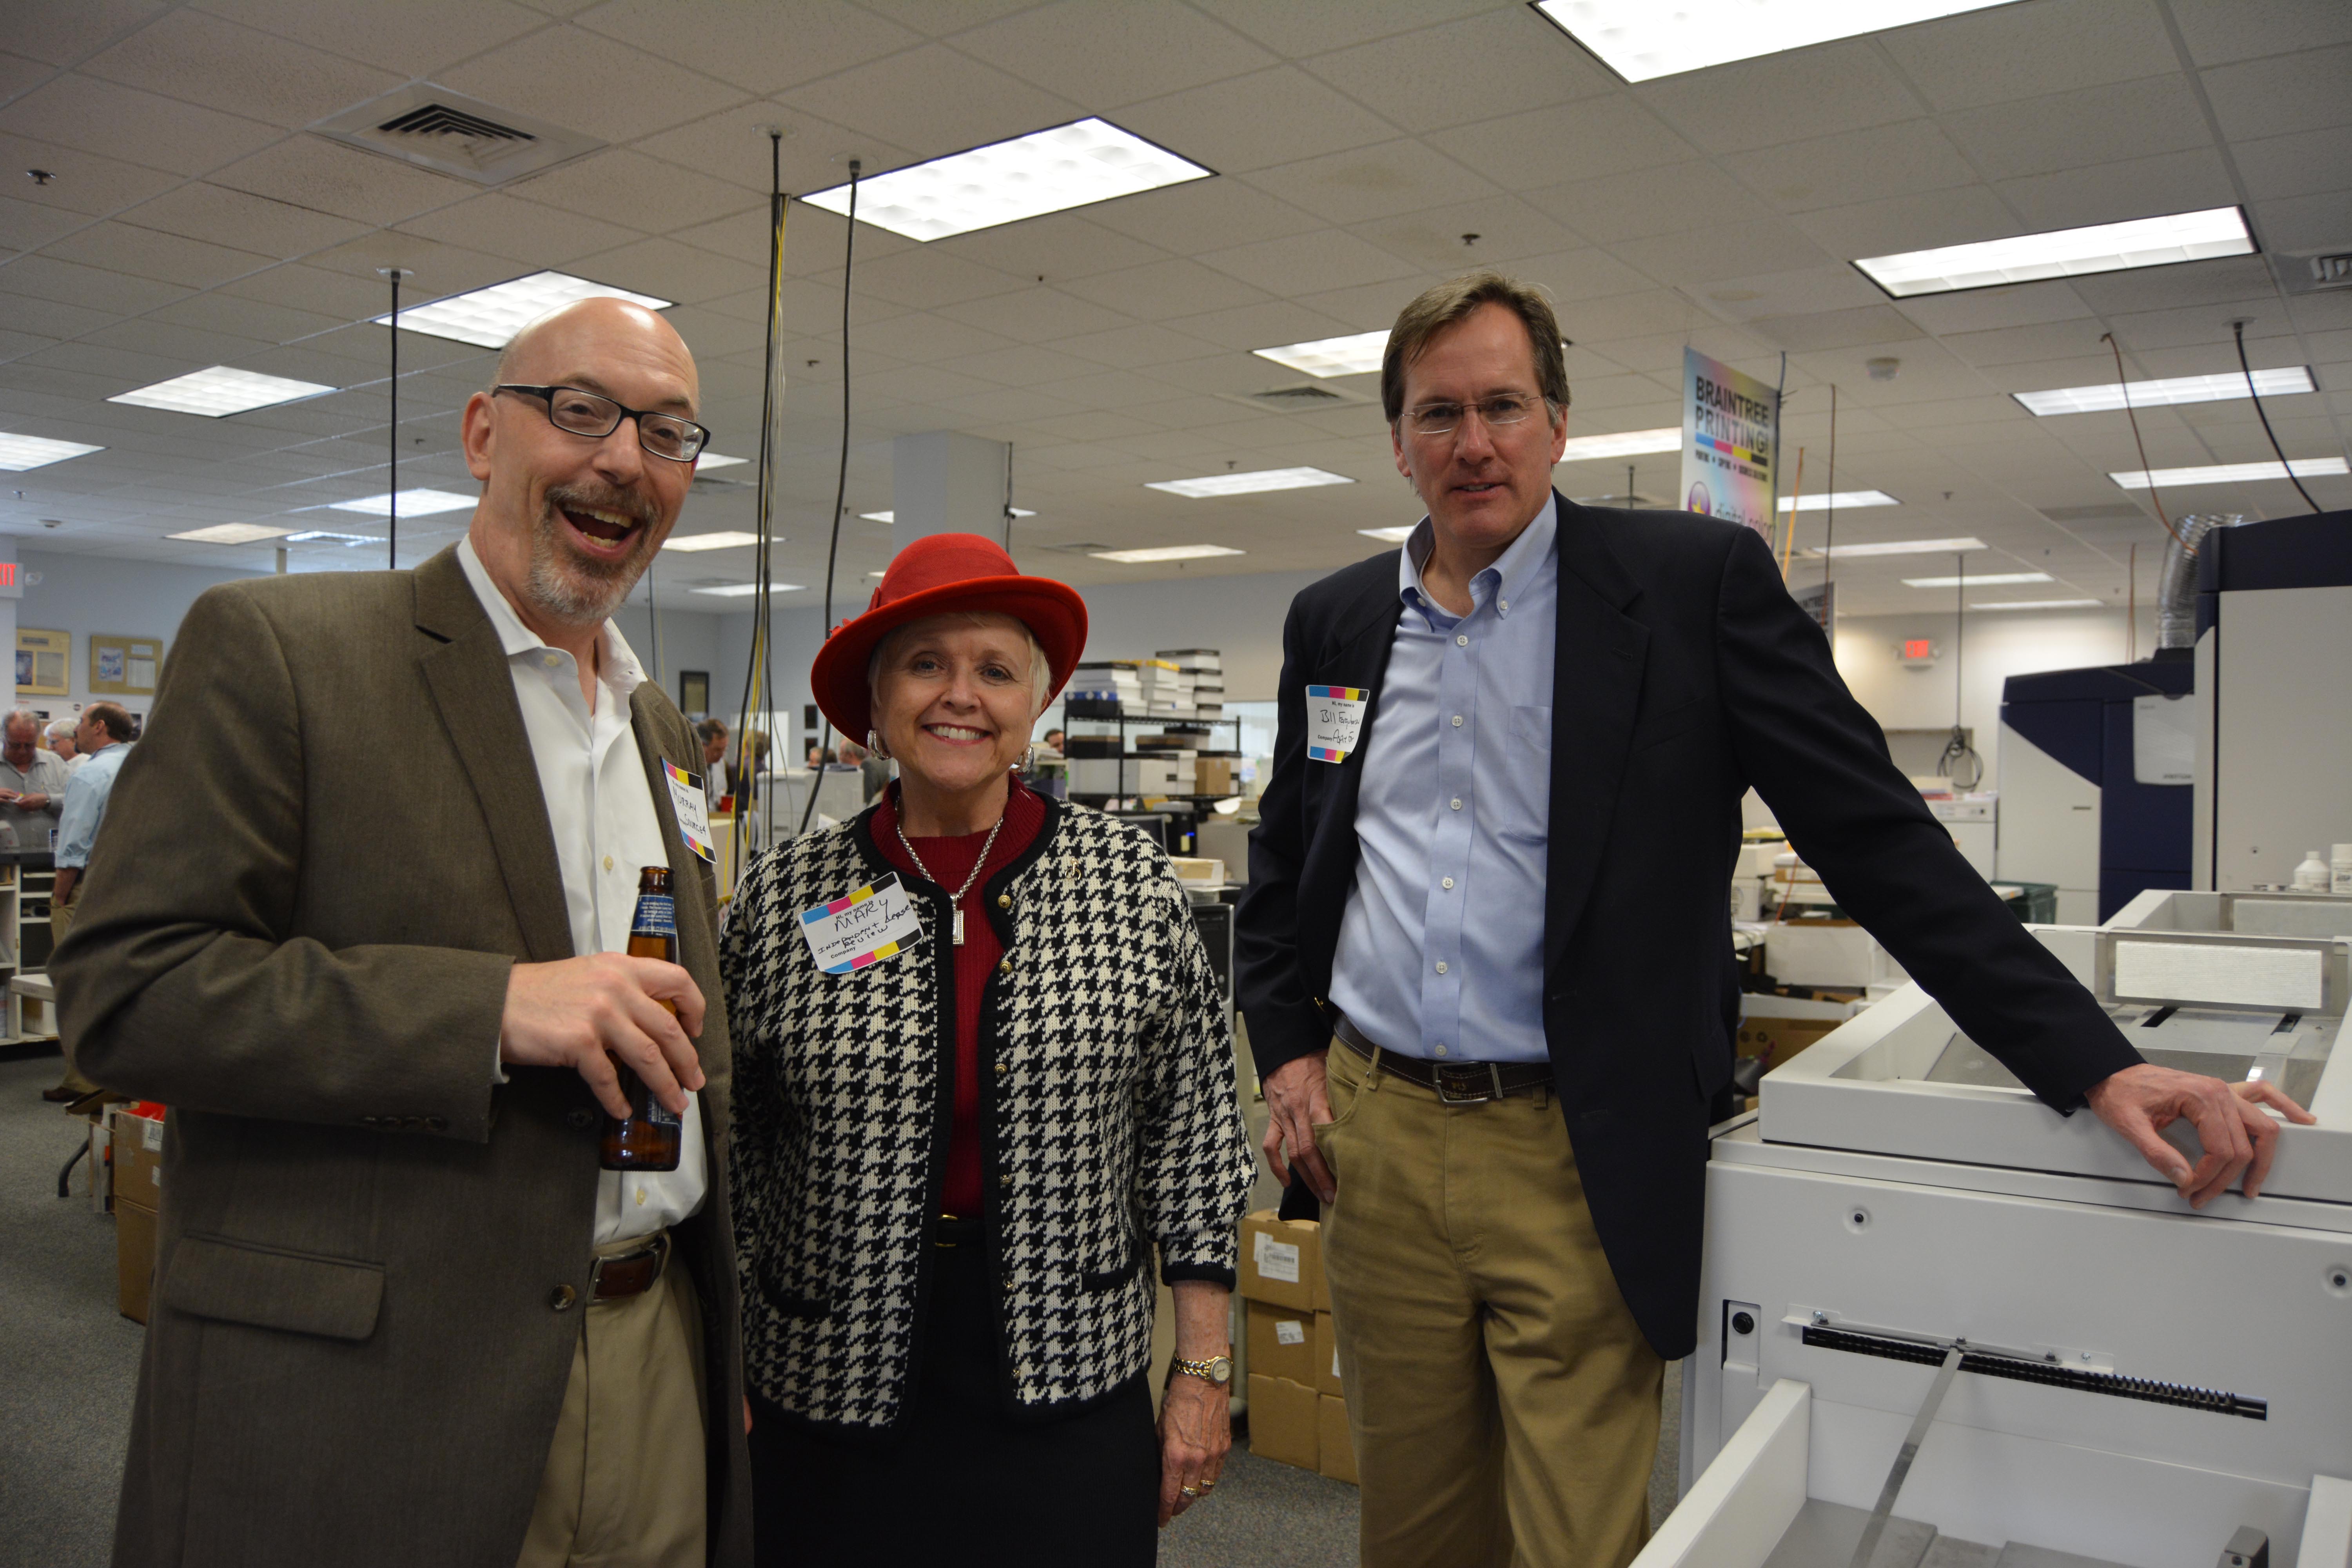 Braintree Printing Hosts Open House for Trade